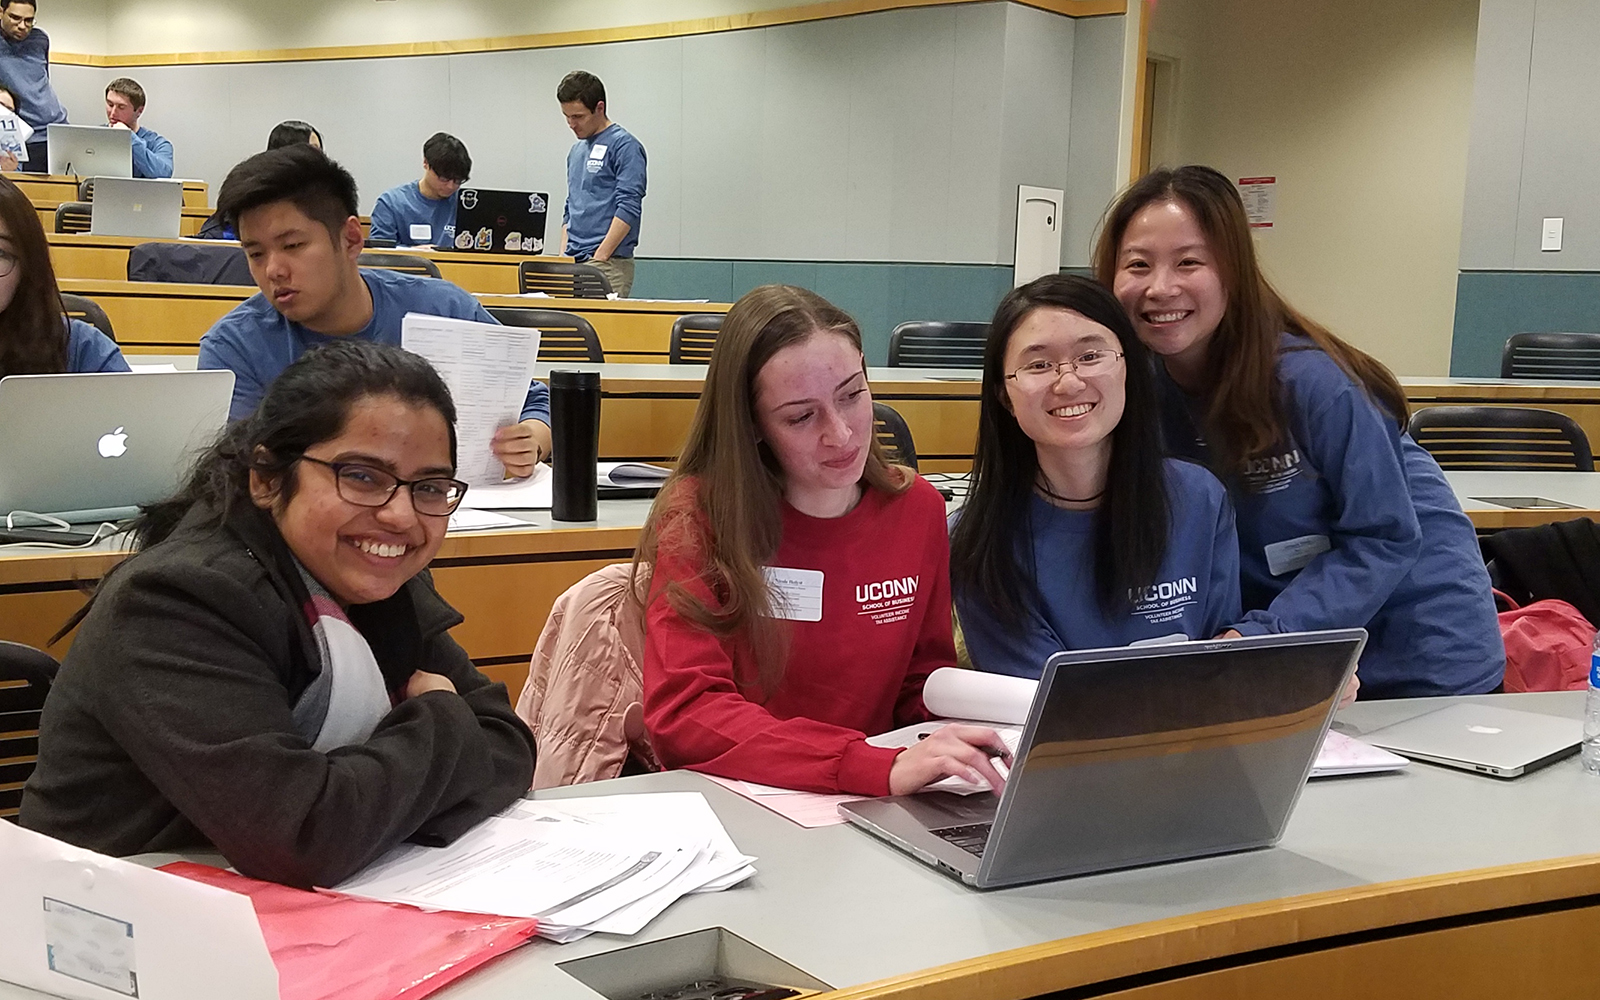 Volunteers prepared taxes for over 700 people this year in the VITA Program.  From left, graduate student Debadarshini Mishra, second-year reviewer Nicole Holyst and first-year preparers Jenny Wei and Qingya Yang.